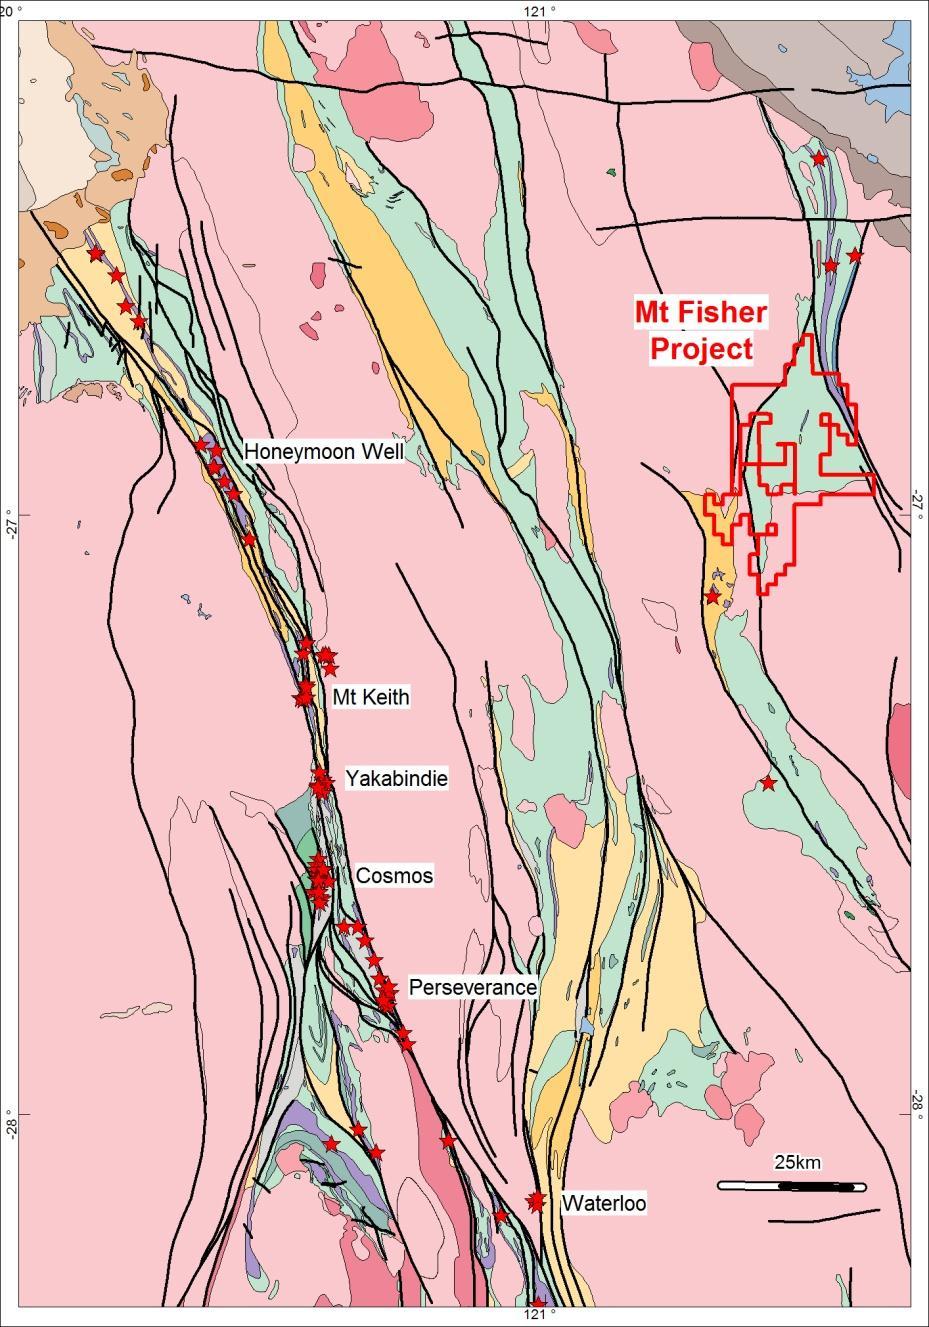 Mt Fisher Nickel Location Mt Fisher Project located 150km northeast of Leinster, WA in North Eastern Goldfields